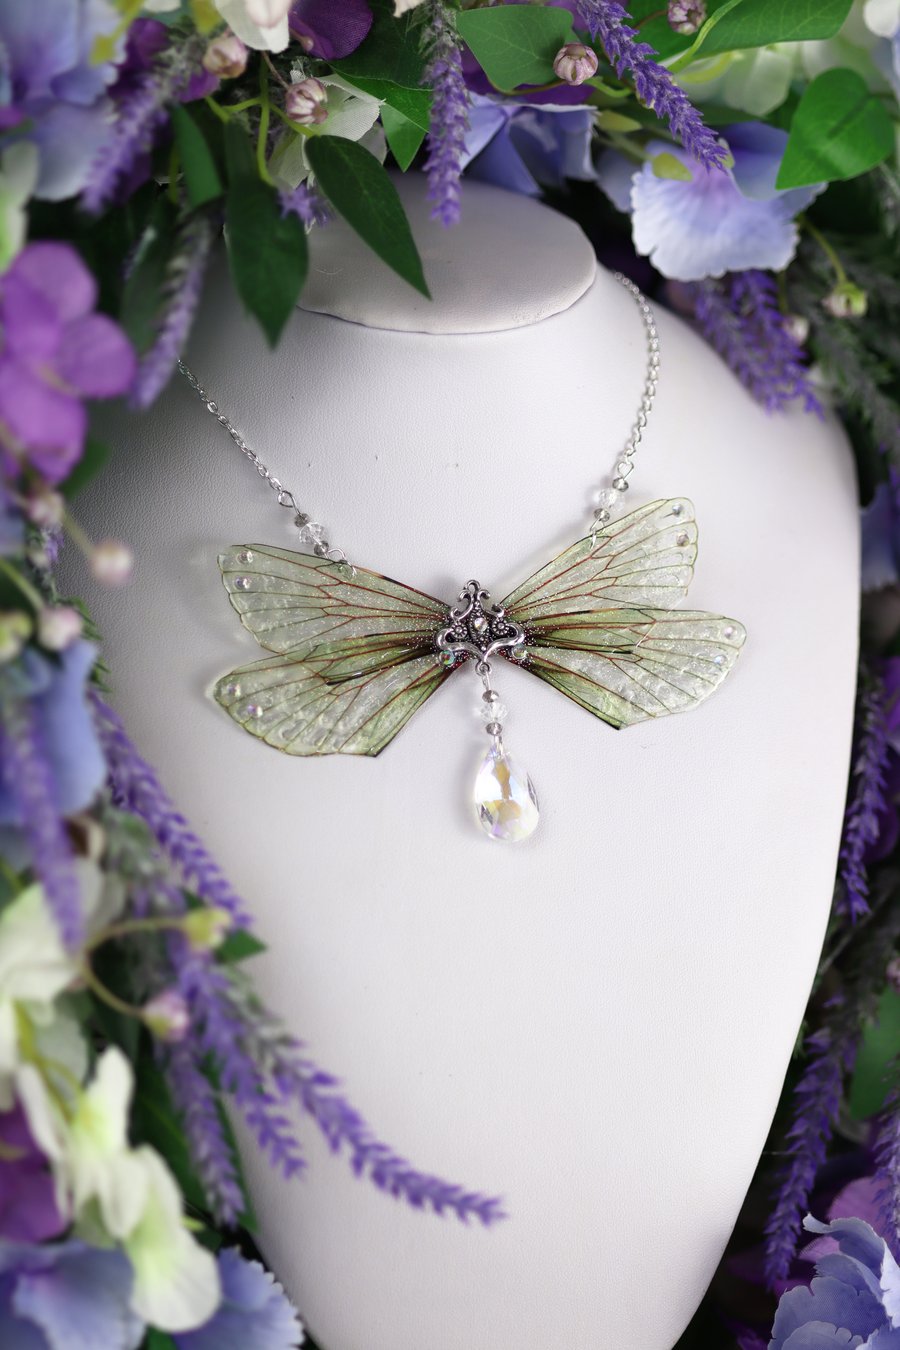 Fairy Wing Necklace - Butterfly Cicada - Fancy Natural - Fairycore - Gift - Boho